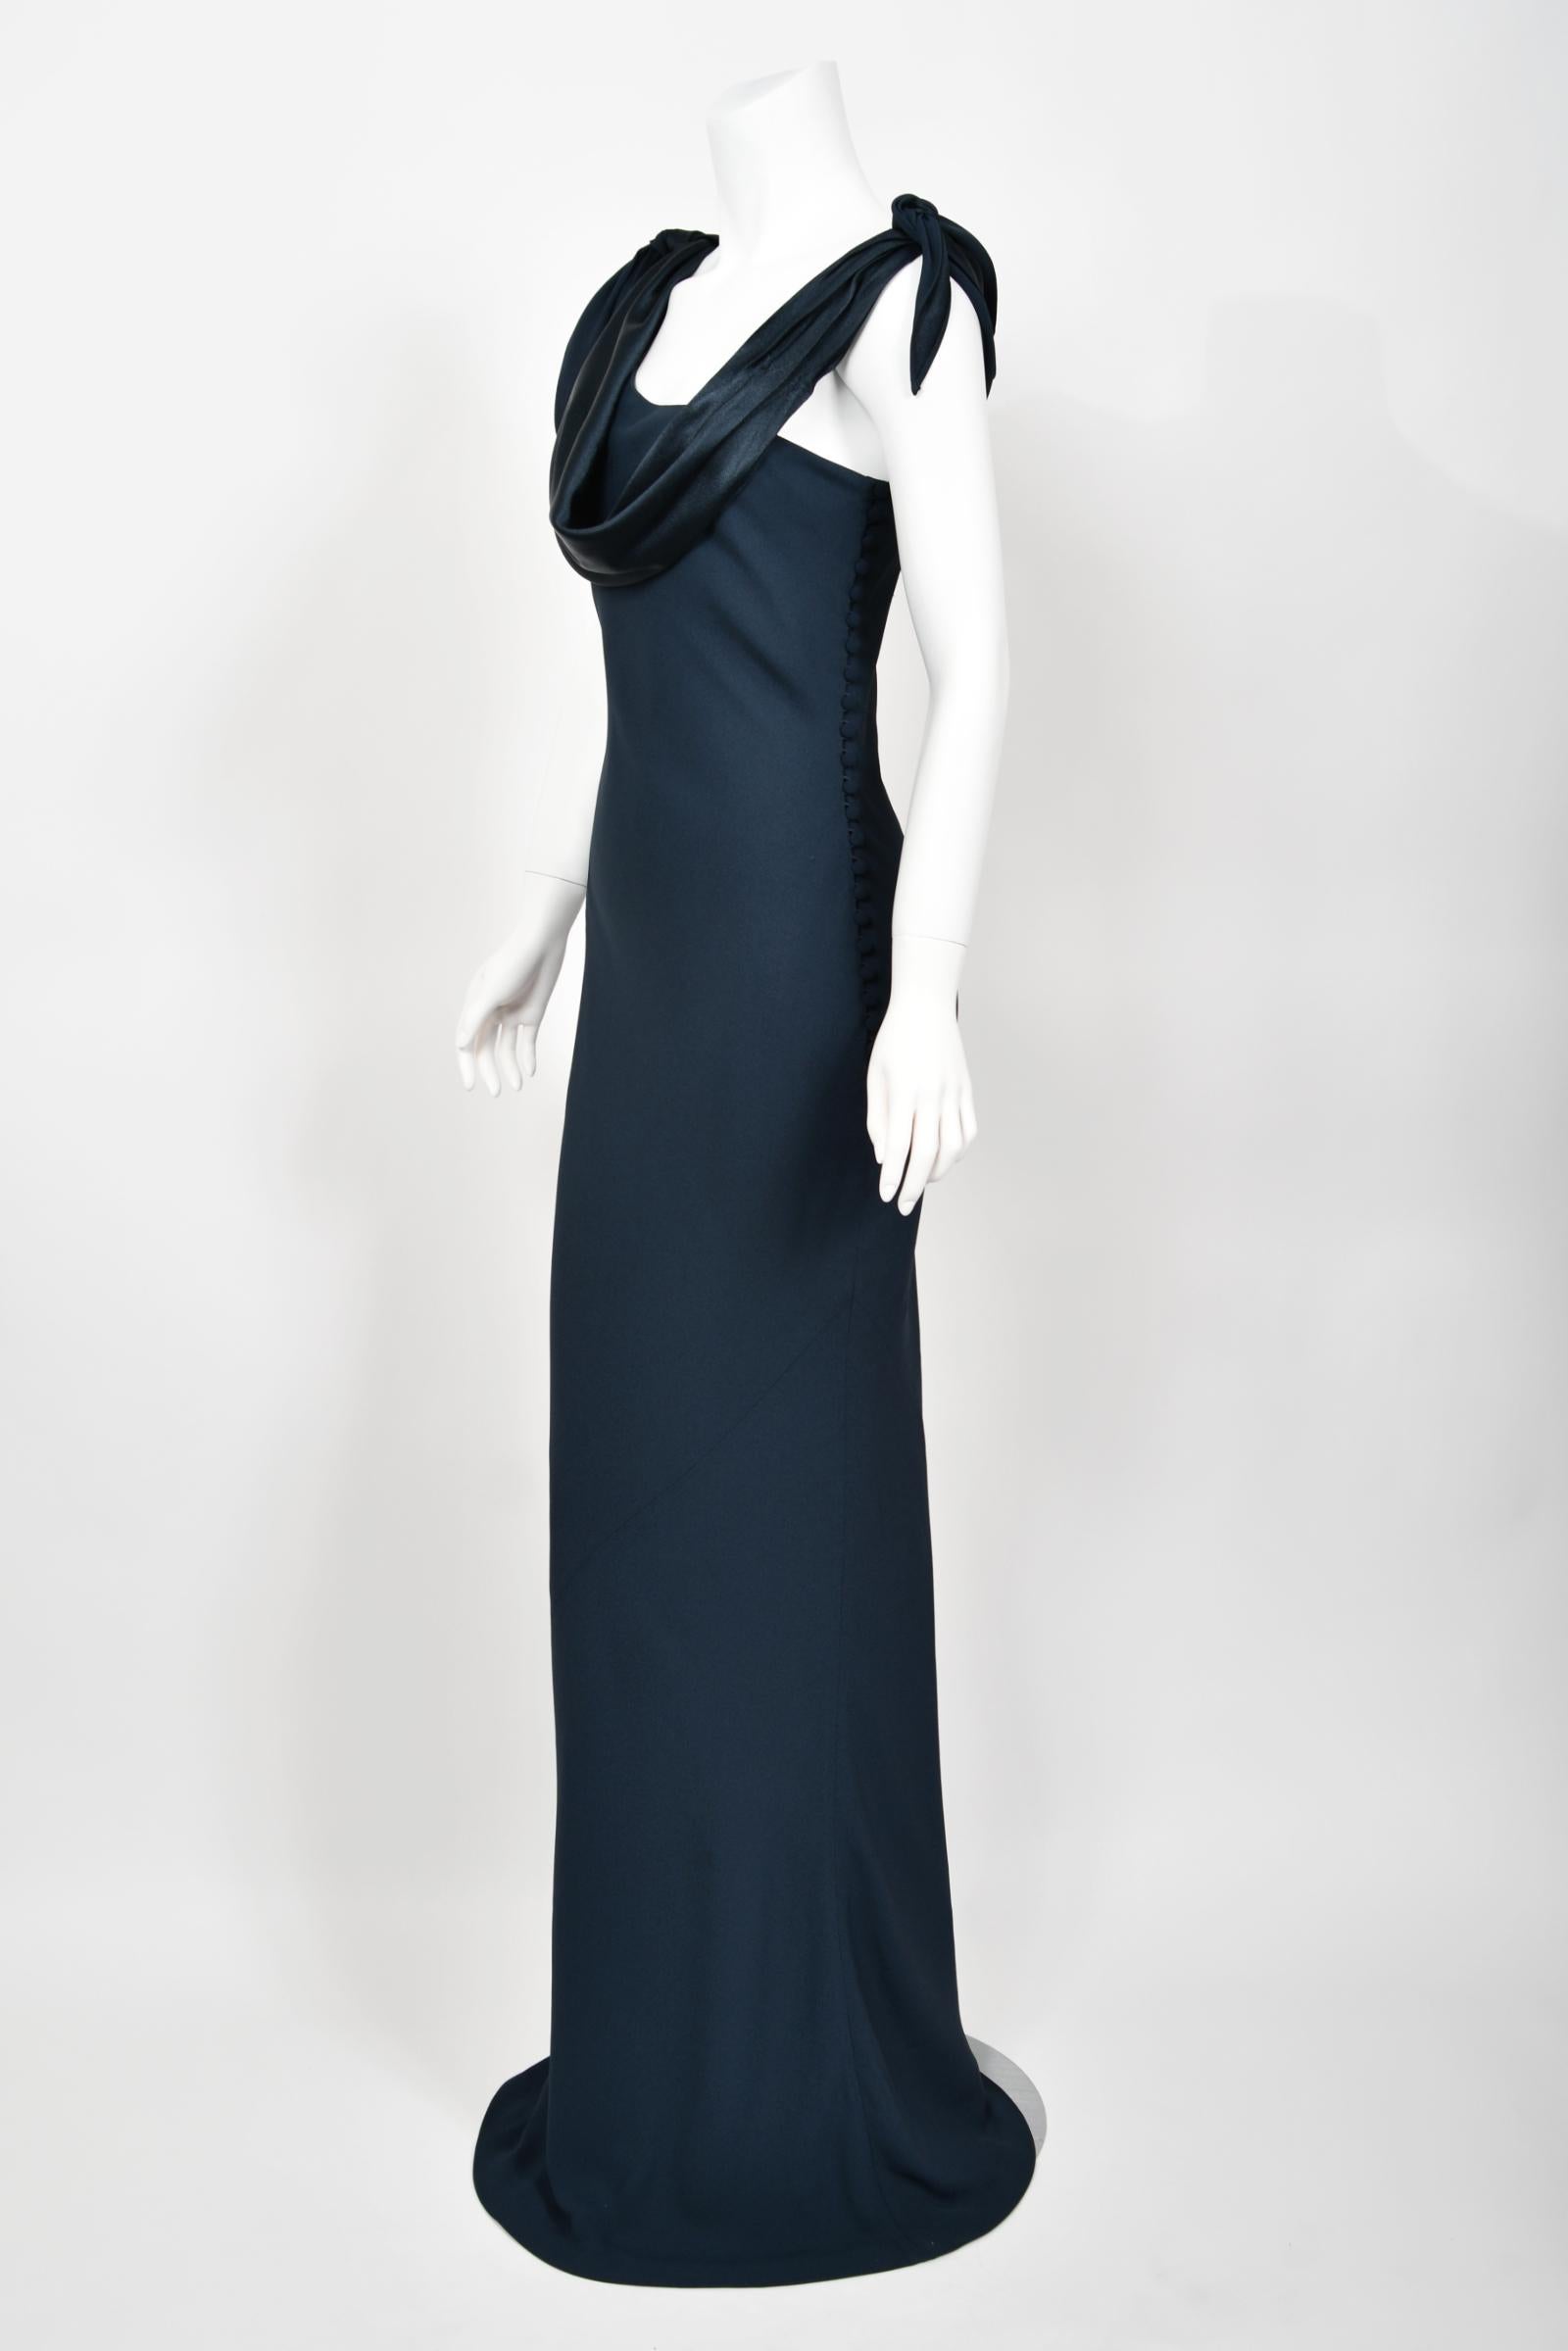 1998 Christian Dior by John Galliano Navy Blue Silk Draped Bias-Cut Evening Gown For Sale 5